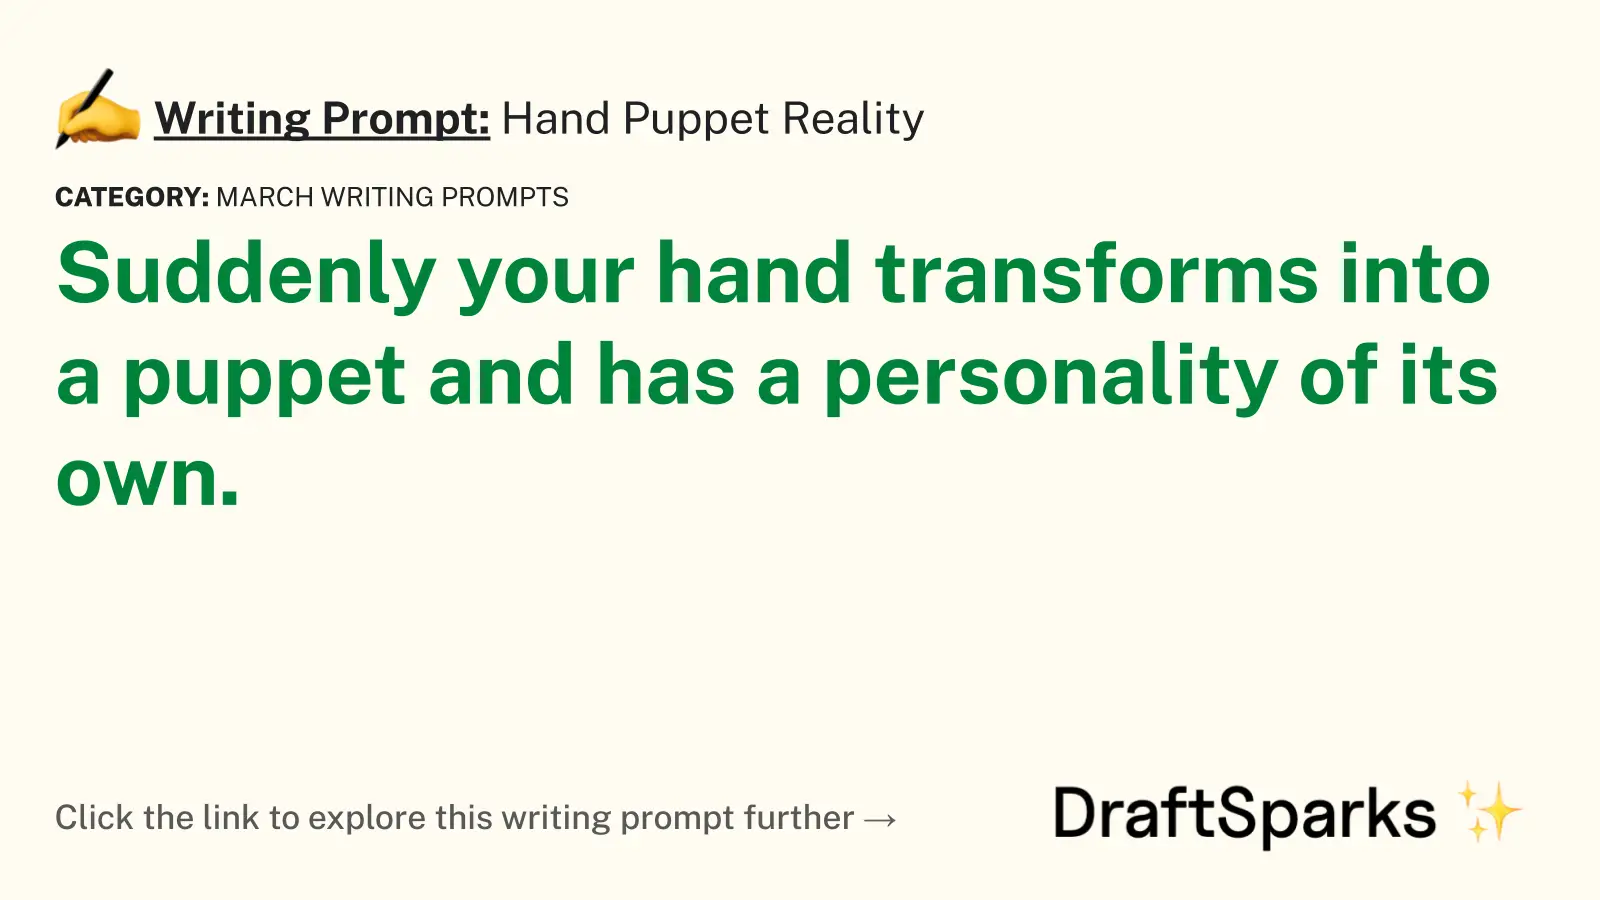 Hand Puppet Reality